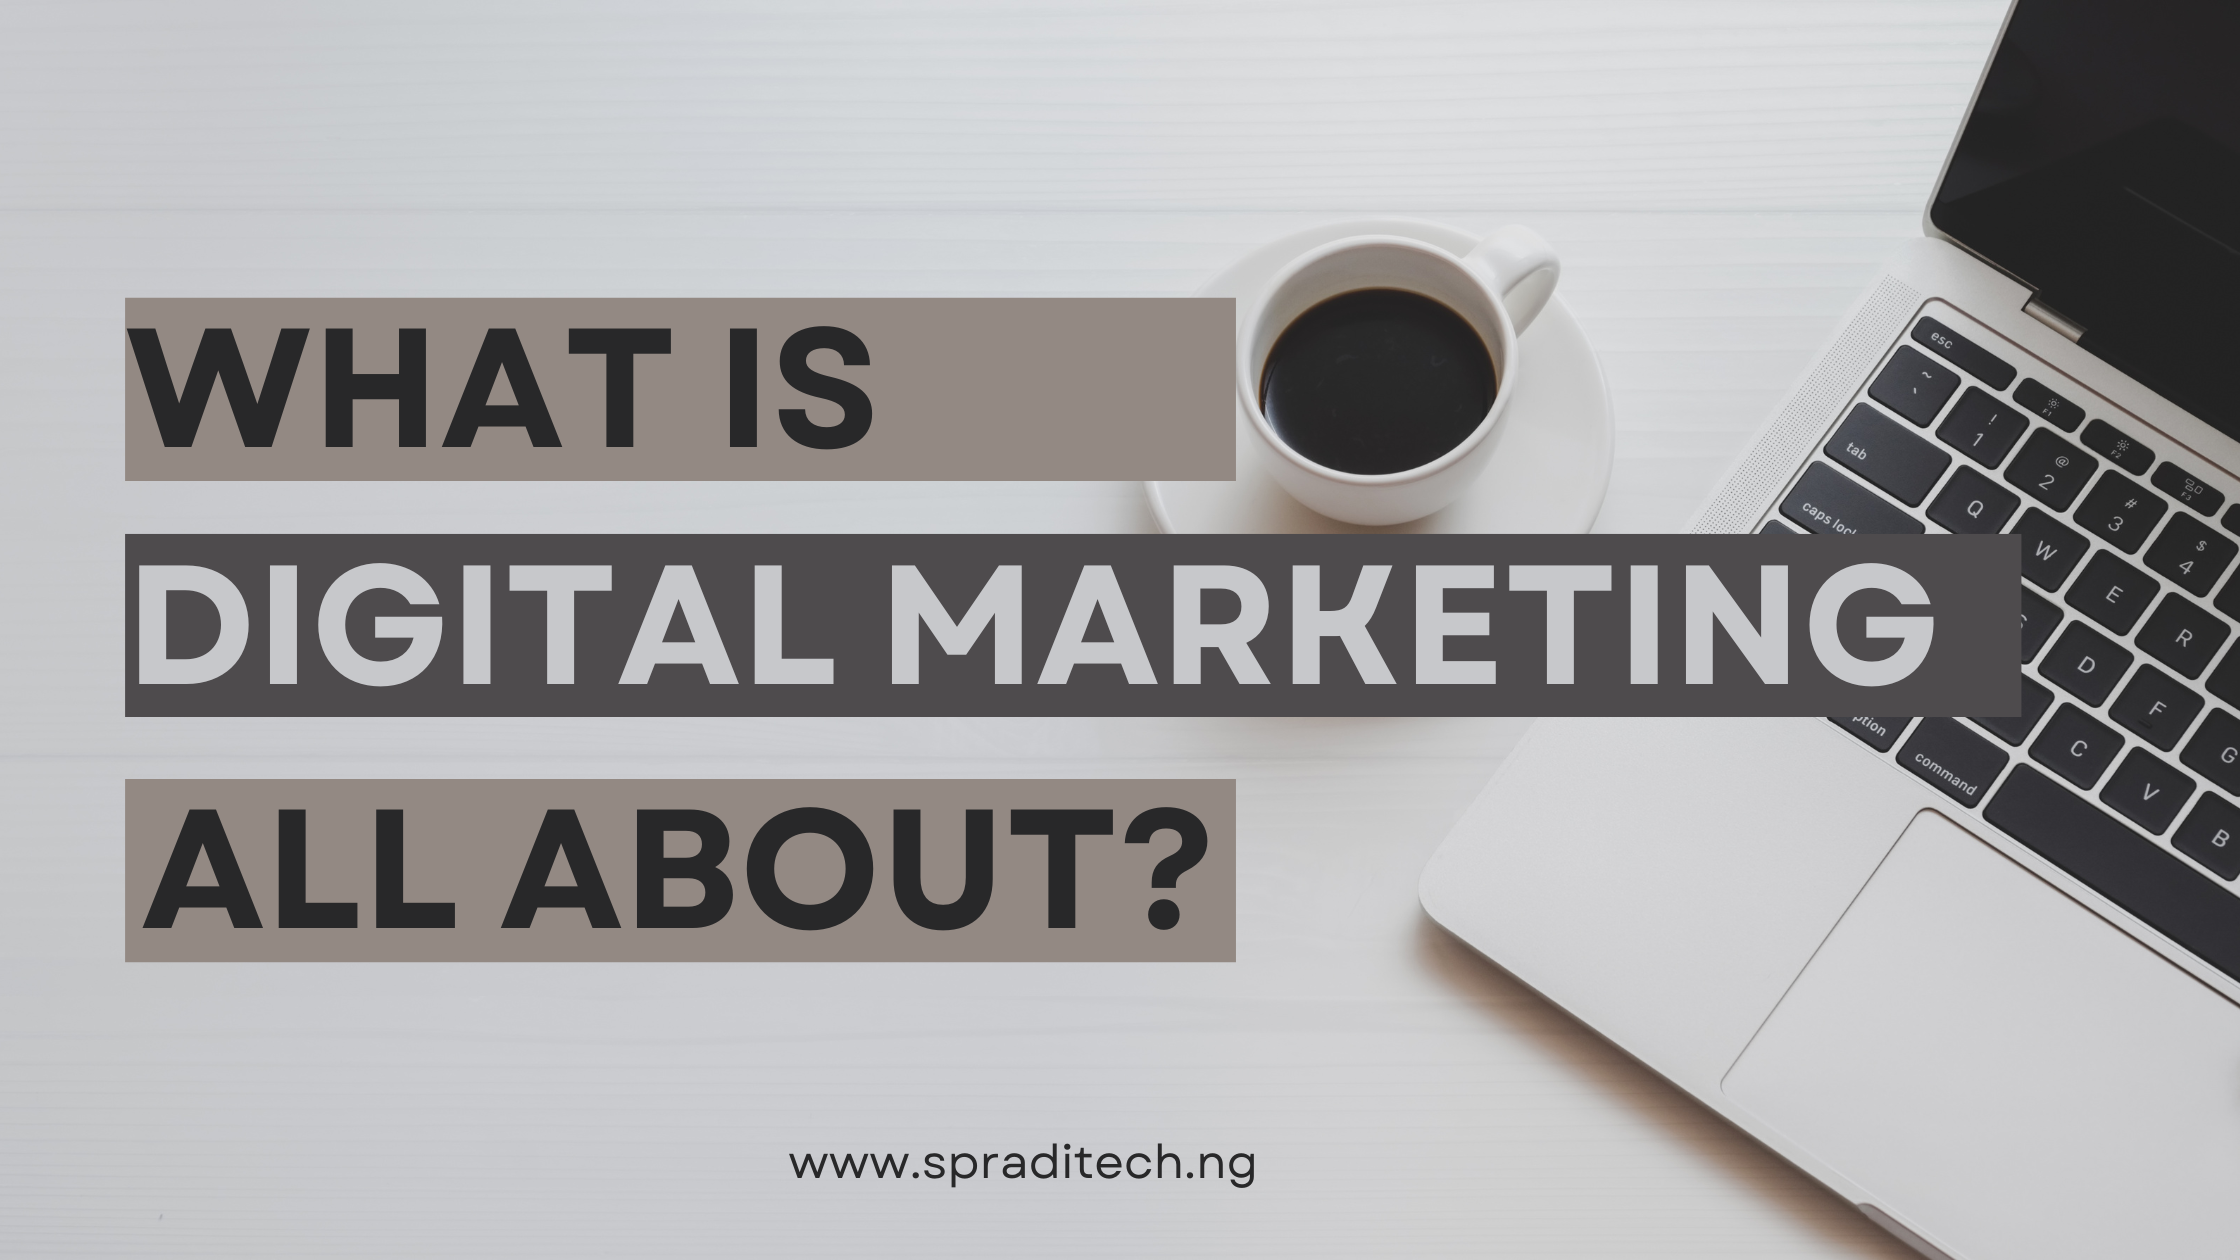 What is Digital Marketing All About?